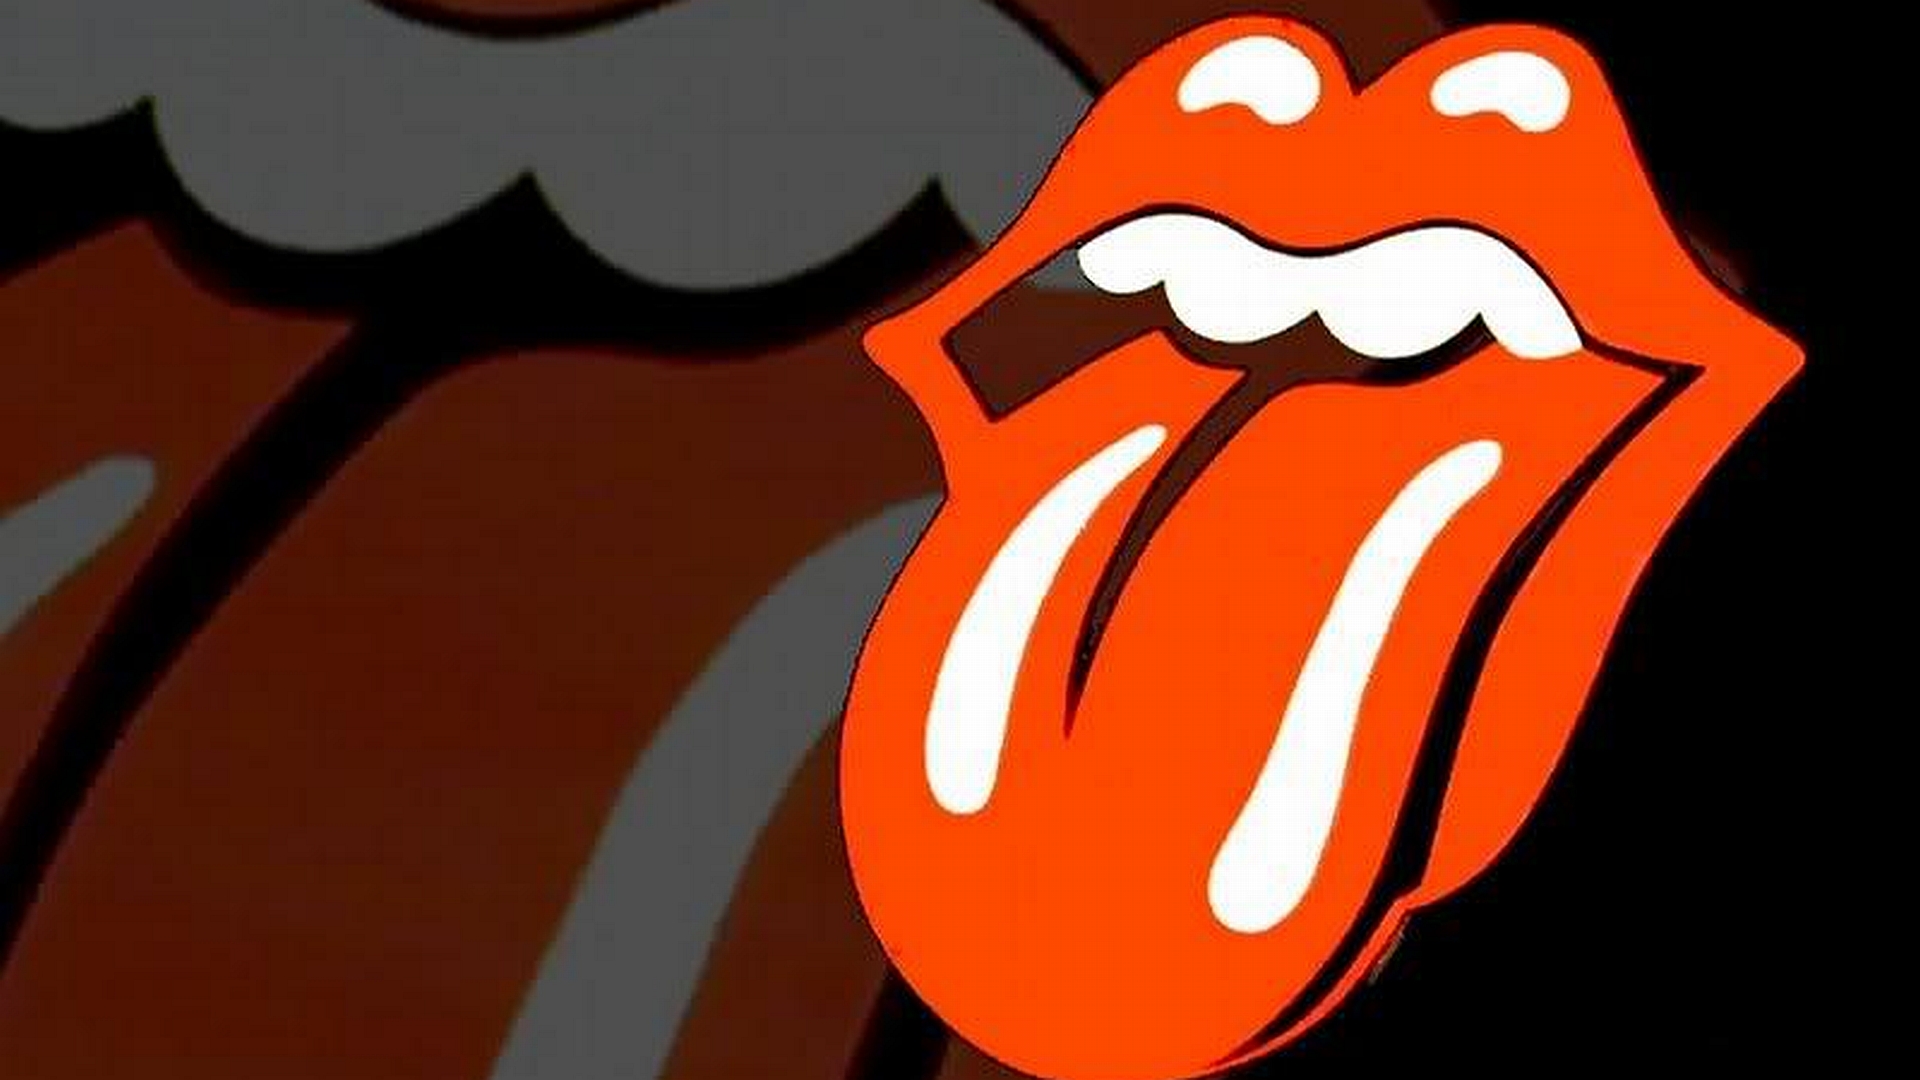 The Rolling Stones Logo Tongue Images Crazy Gallery 1920x1080